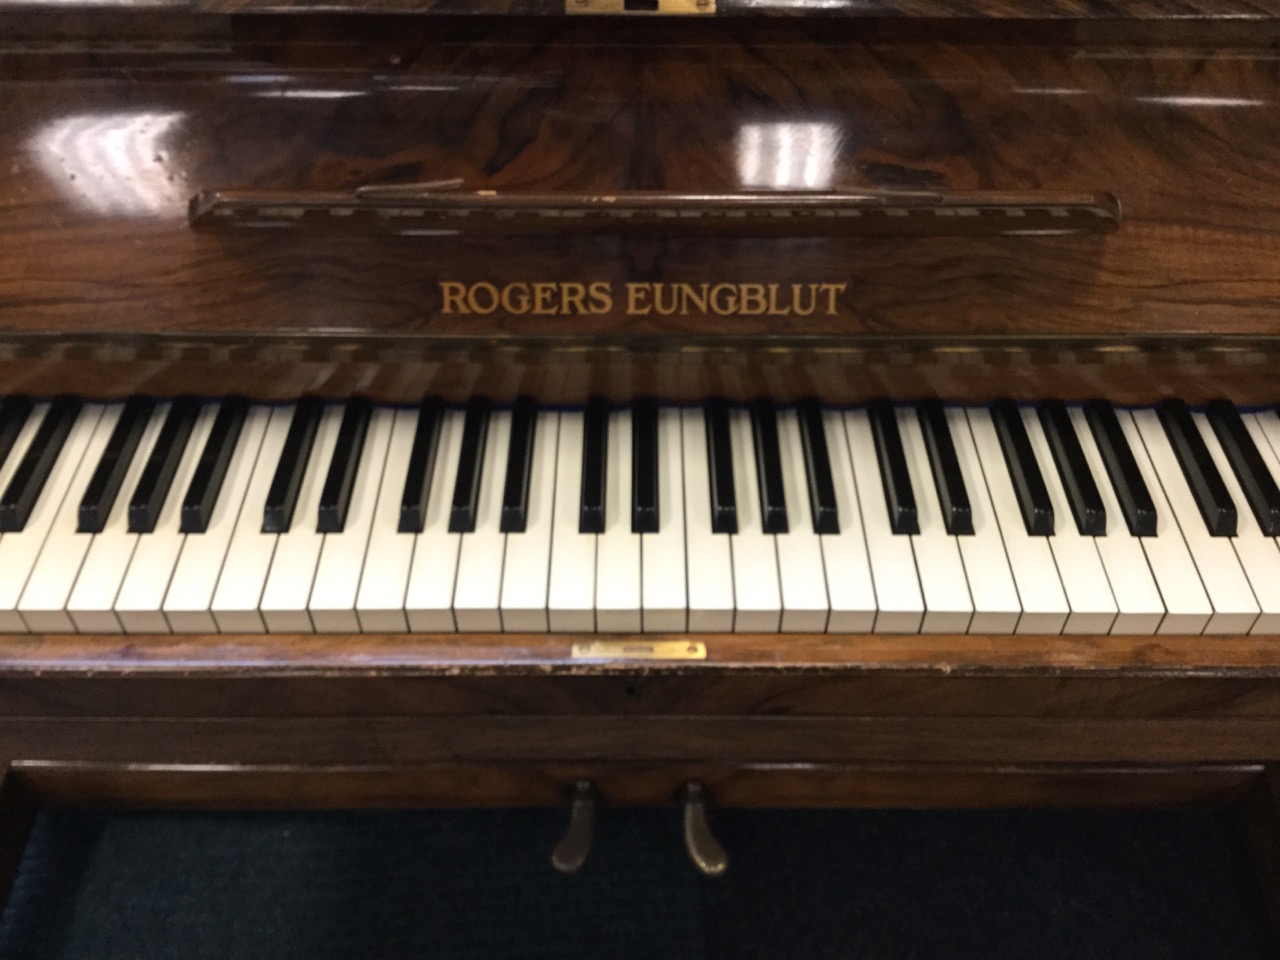 A 1930s walnut upright piano by Rogers Eungblut, with rounded case and seven octave keyboard - Image 2 of 3